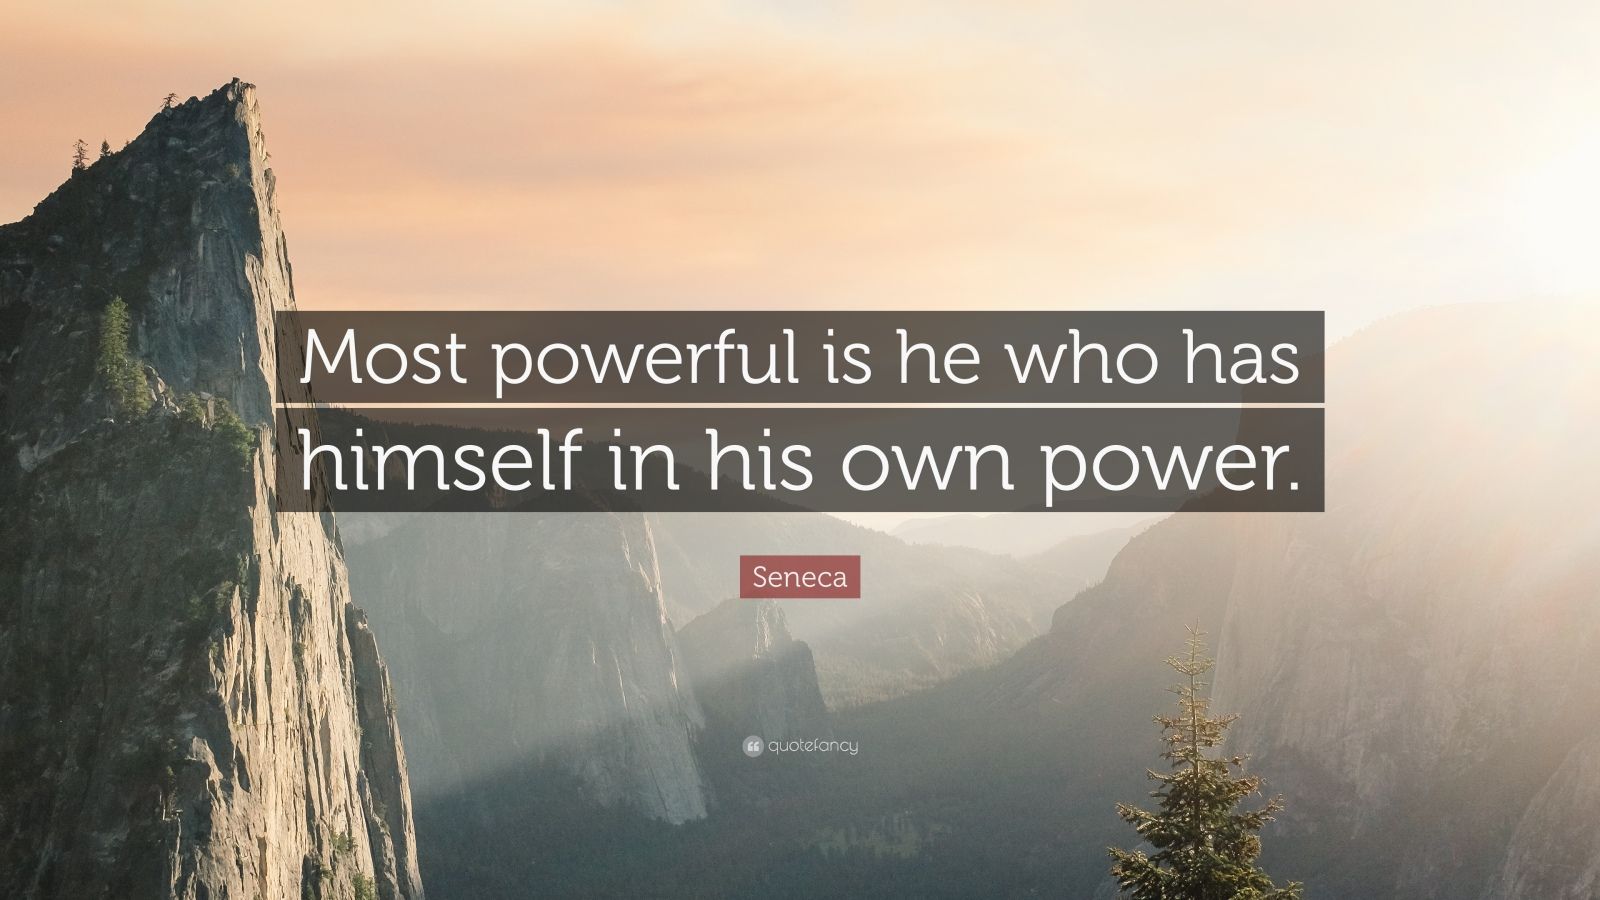 Seneca Quote: “Most powerful is he who has himself in his own power ...